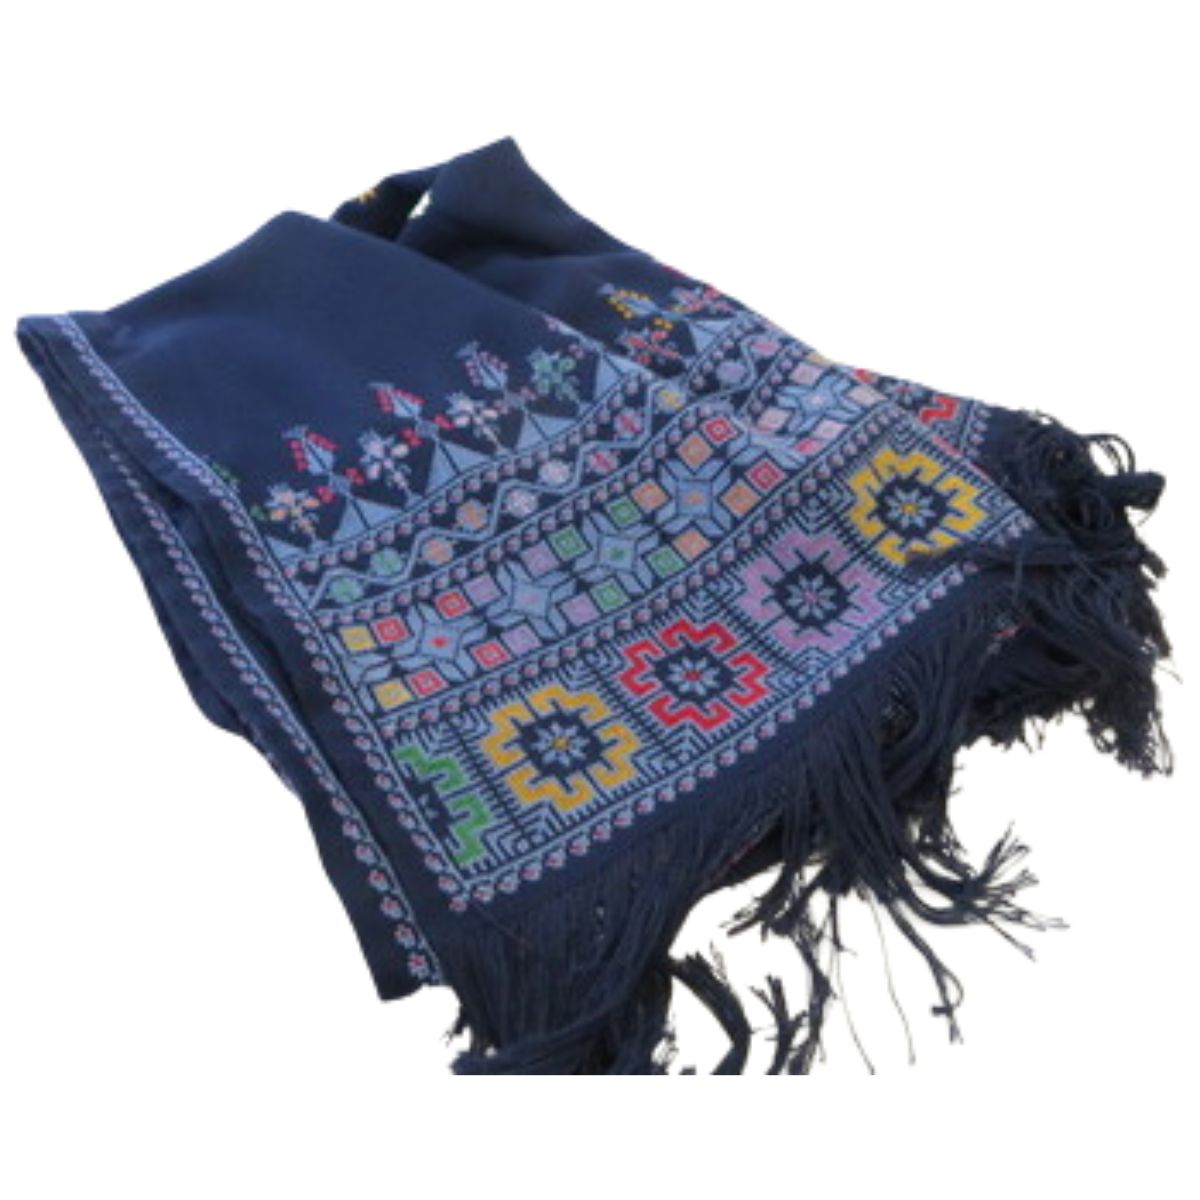 Embroidered Shawl from Gaza